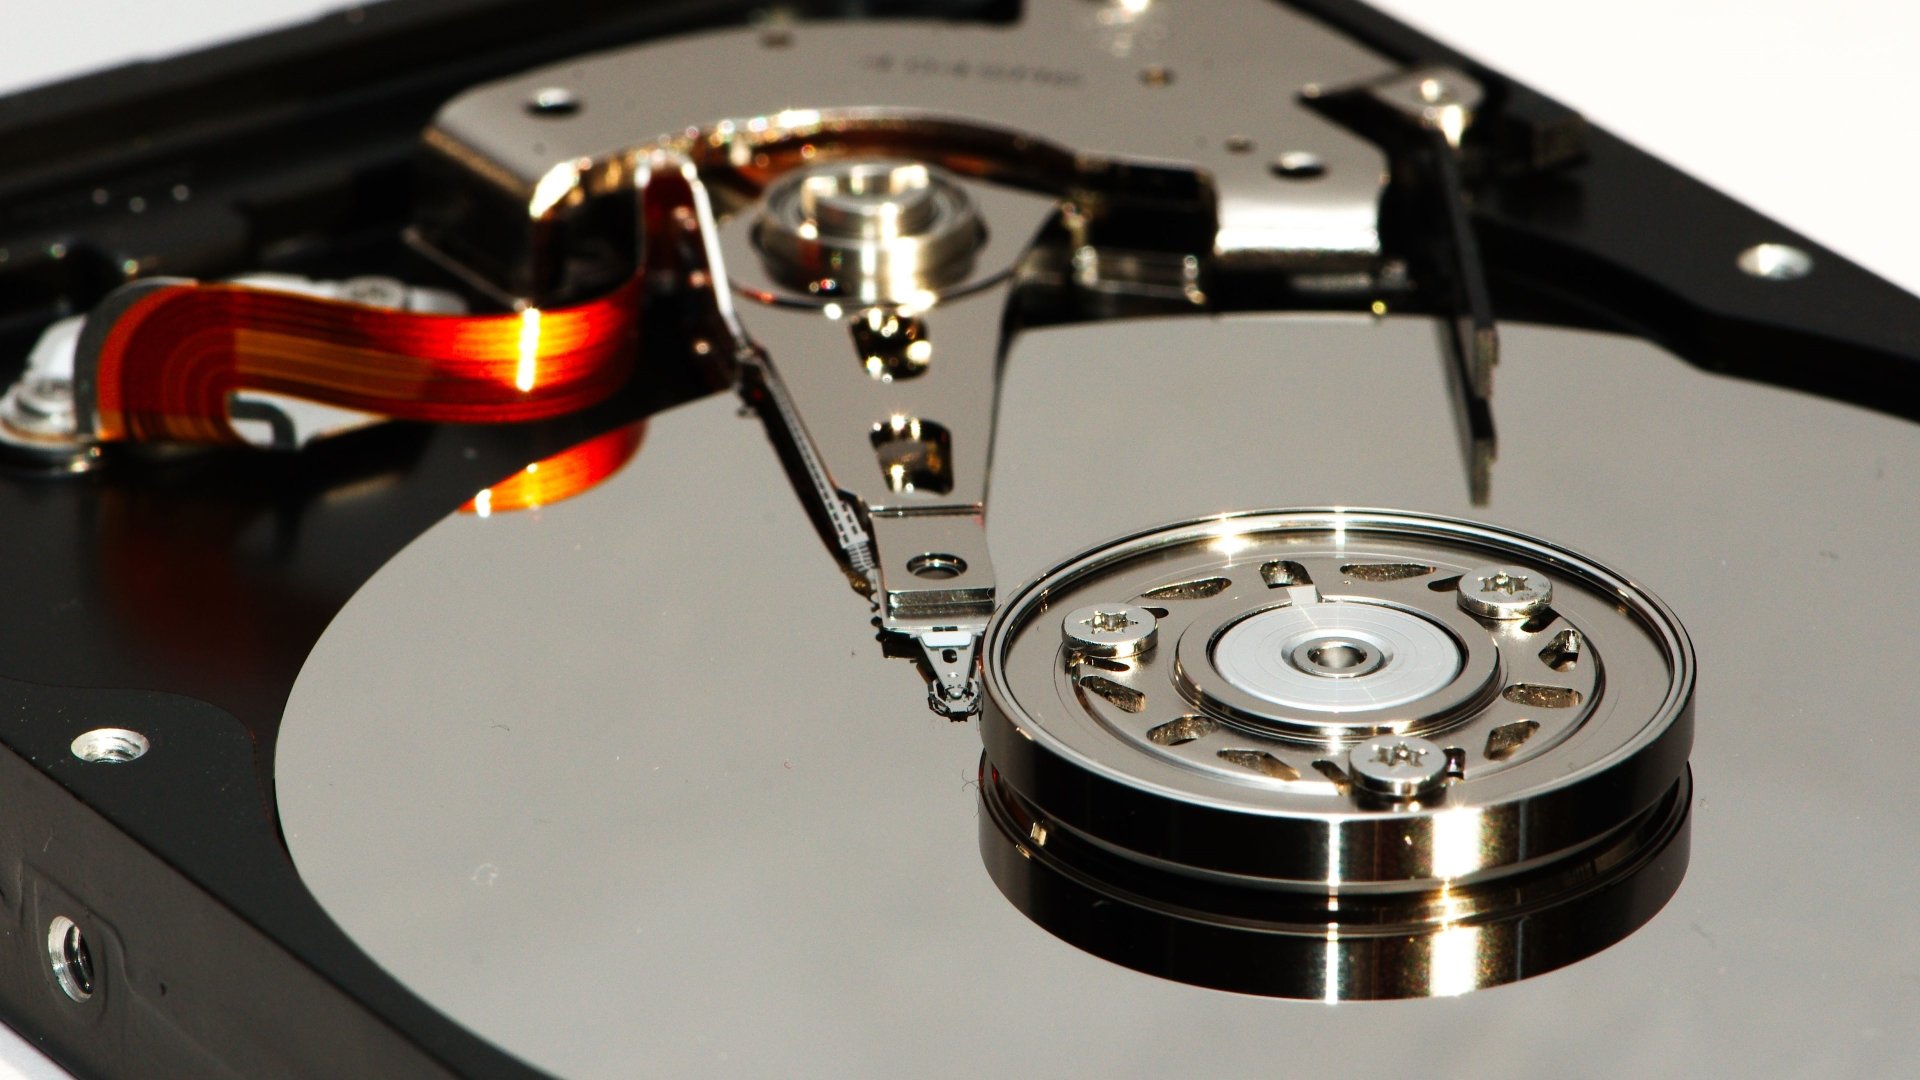 Hard Disk Drive Wallpapers